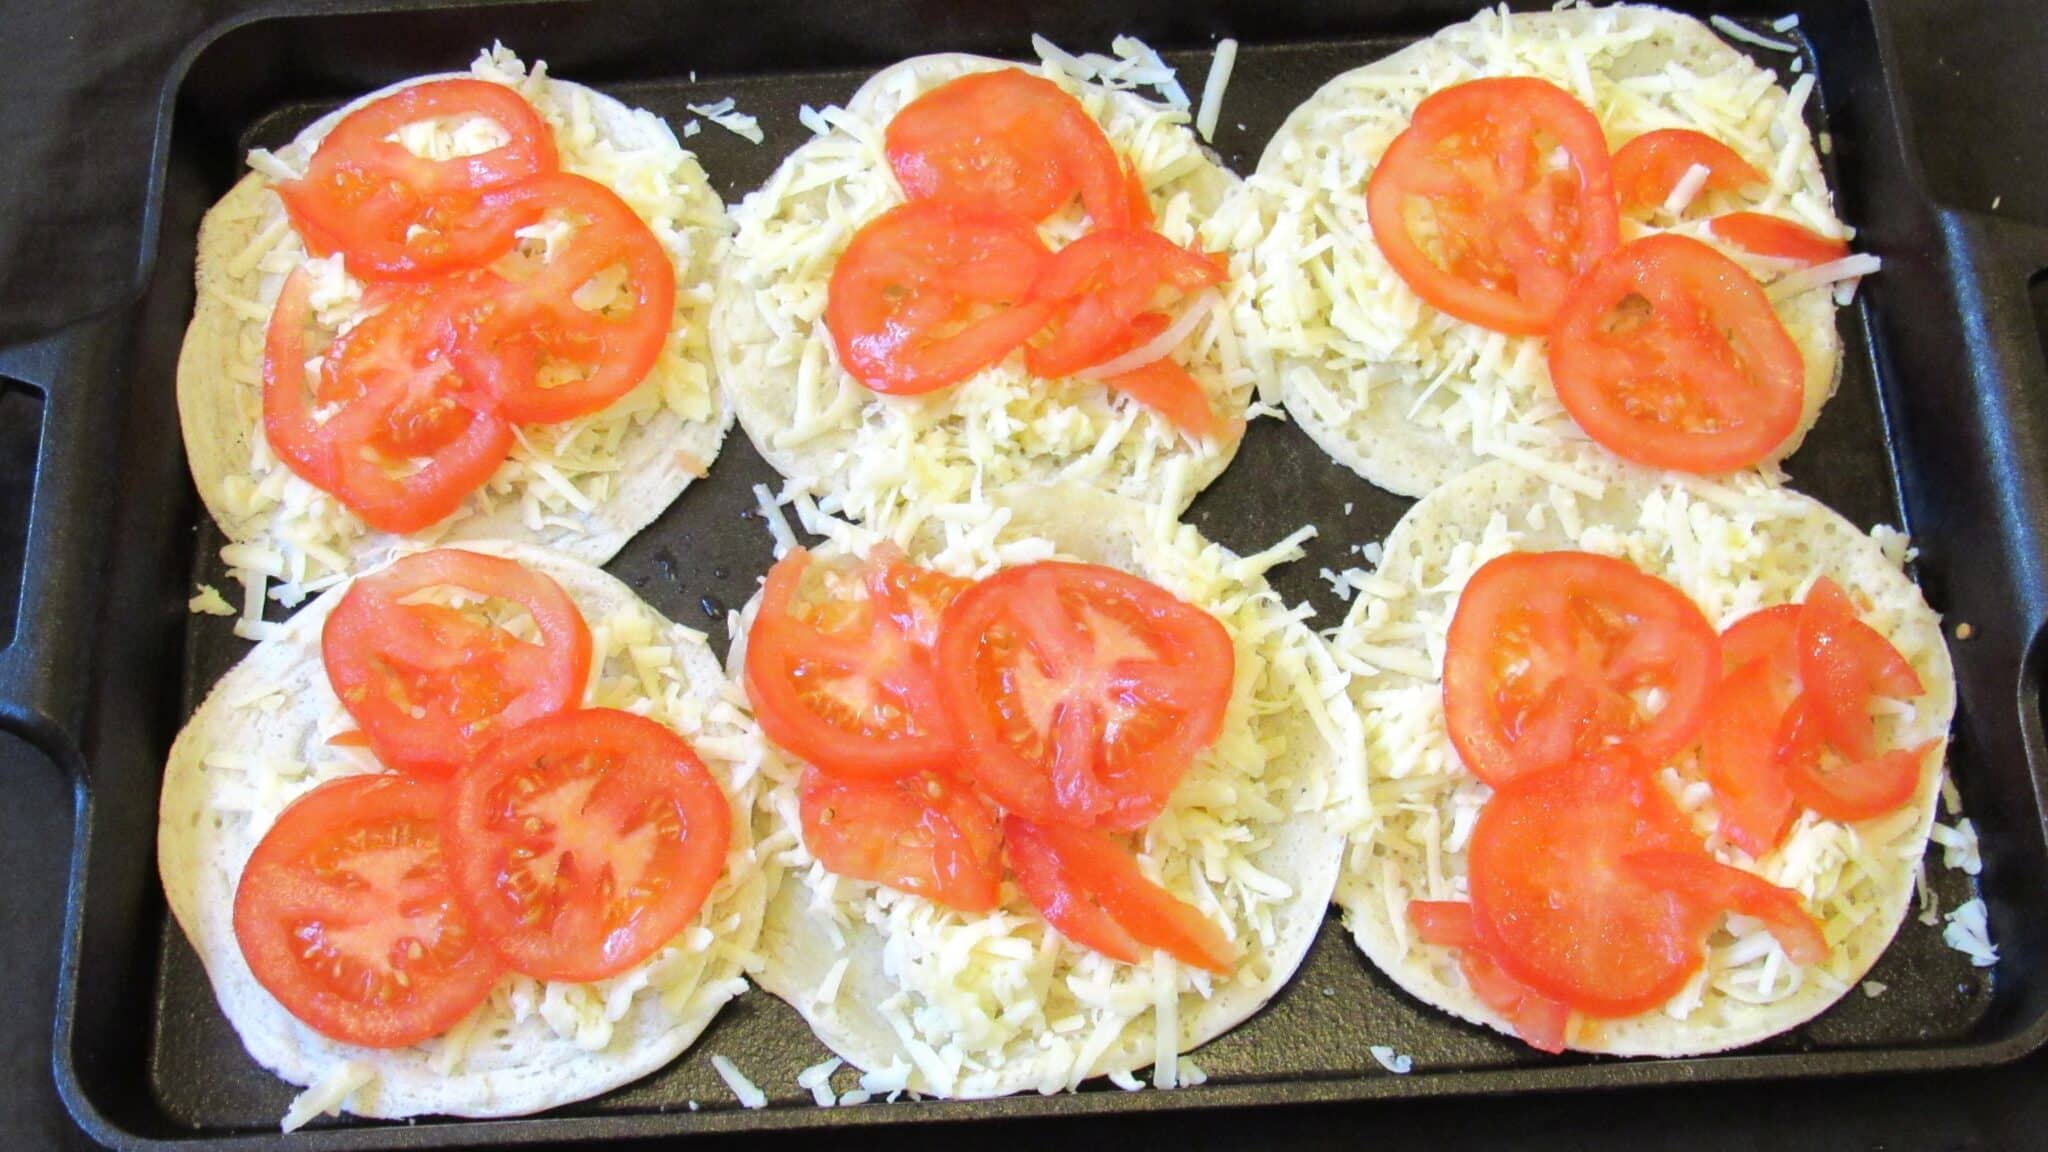 layer cut tomatoes on top of cheese